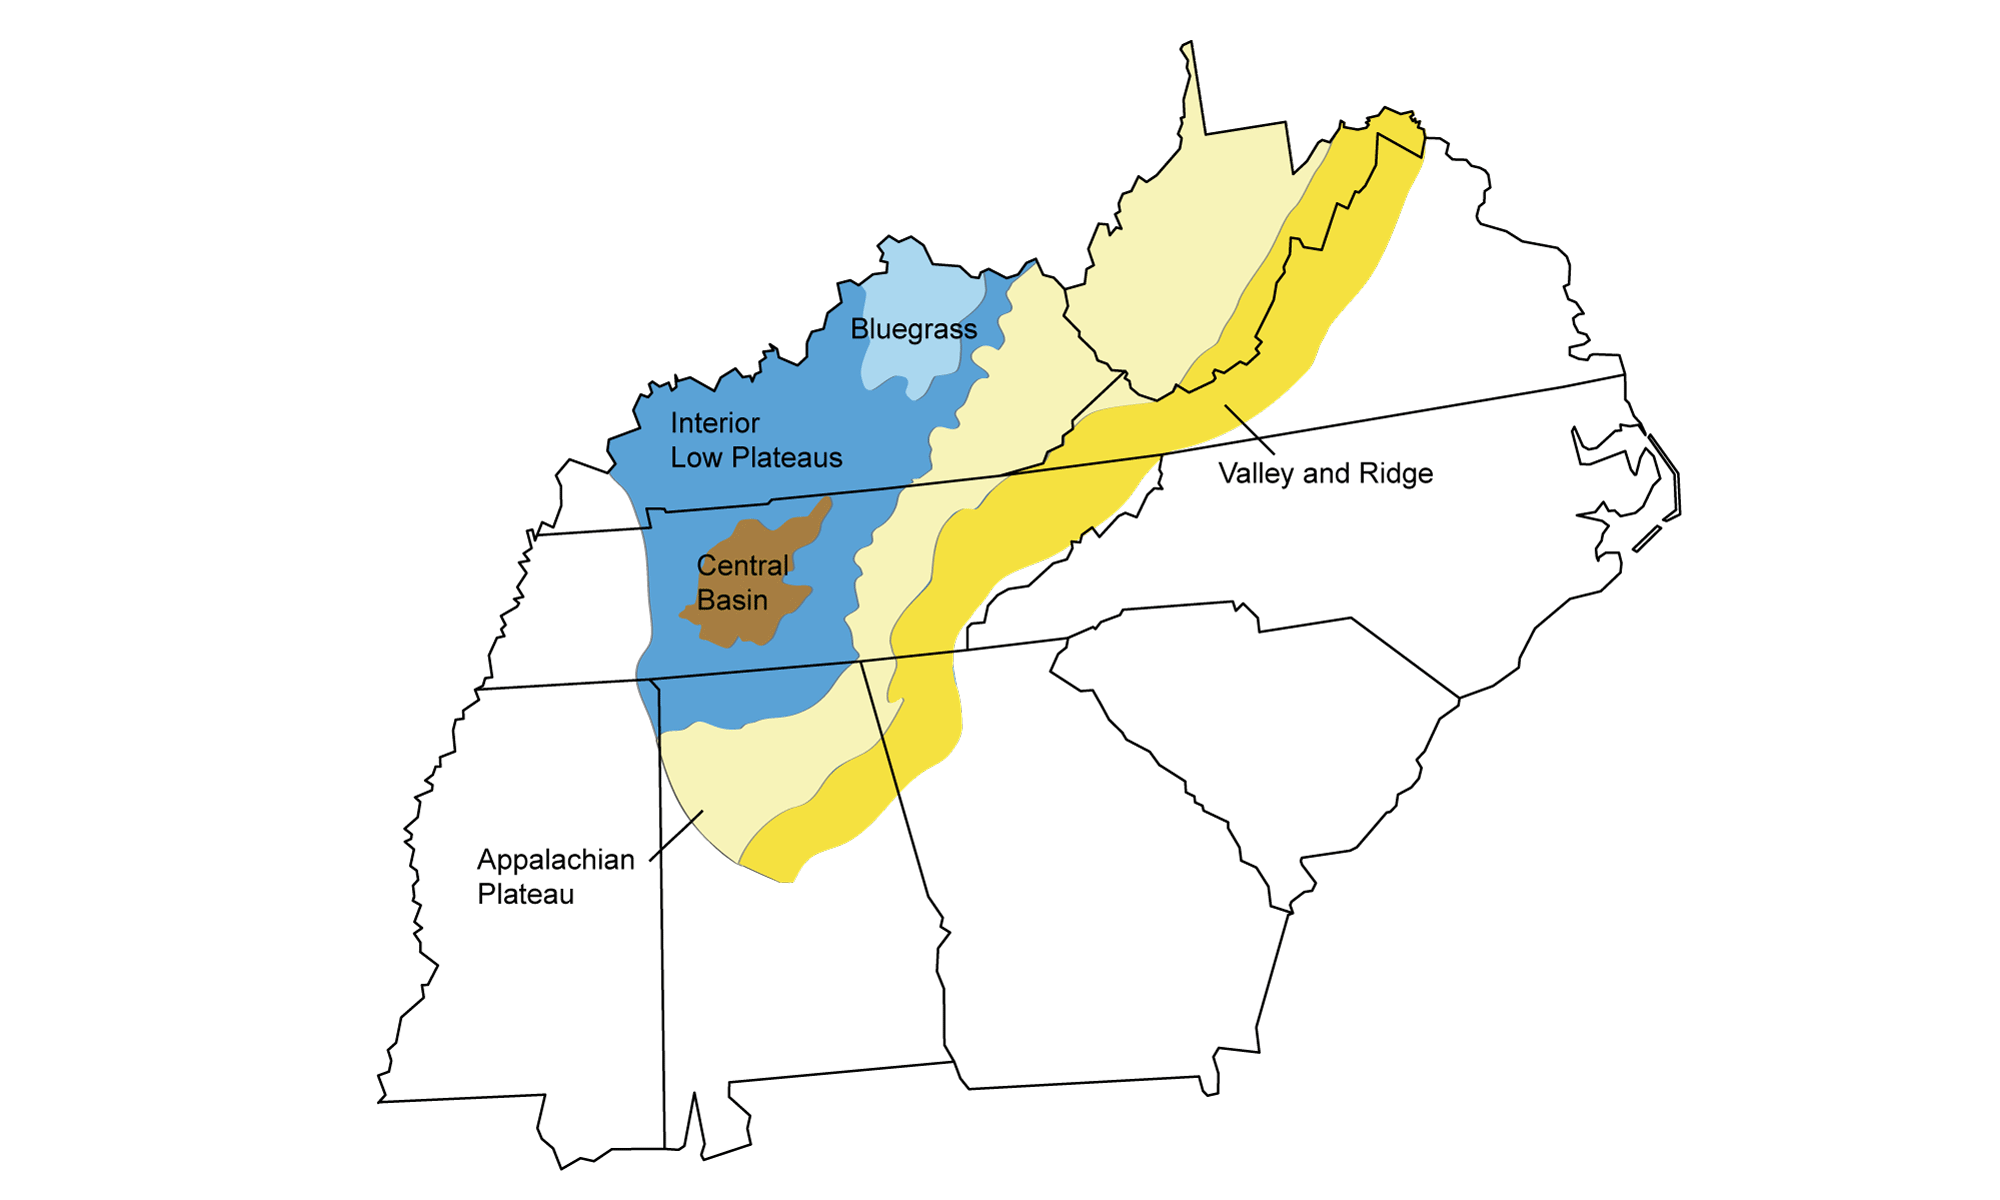 Map showing the physiographic regions of the Inland Basin, including the Bluegrass, Interior Low Plateaus, Central Basin, Appalachian Plateau, and Valley and Ridge.